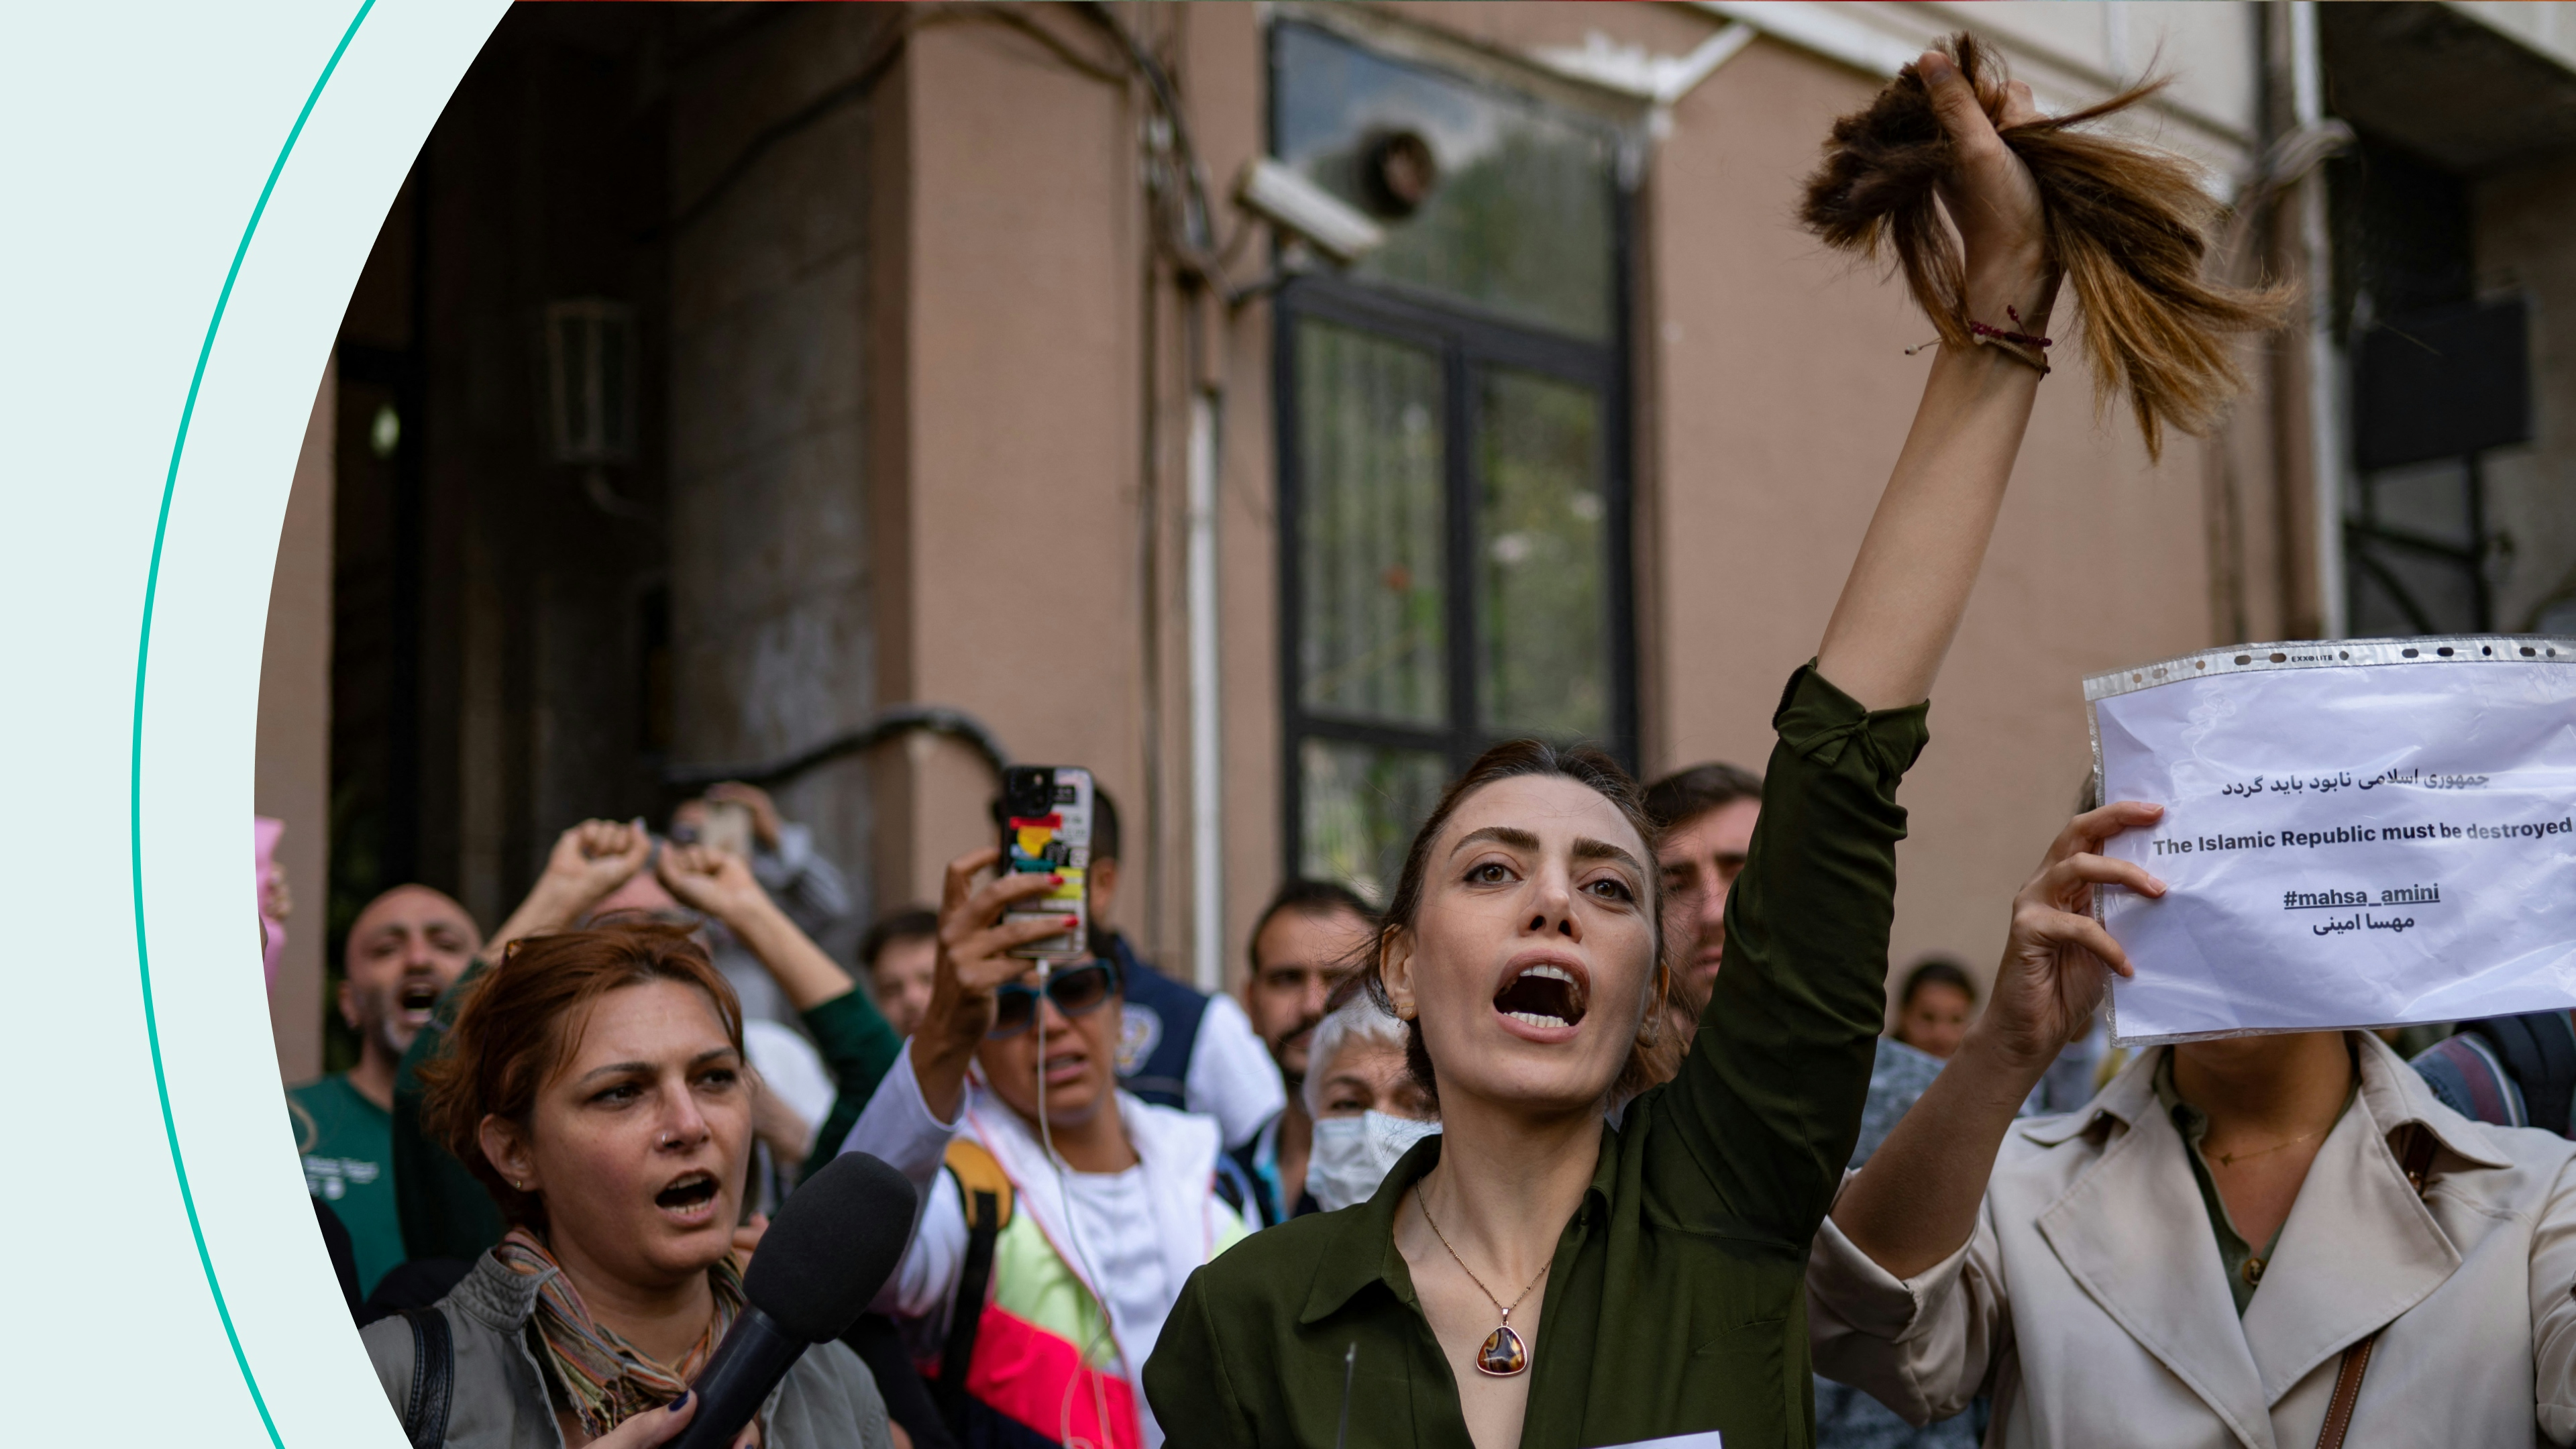 Nasibe Samsaei, an Iranian woman living in Turkey, holds up her ponytail after cutting it off with scissors, during a protest outside the Iranian consulate in Istanbul on September 21, 2022